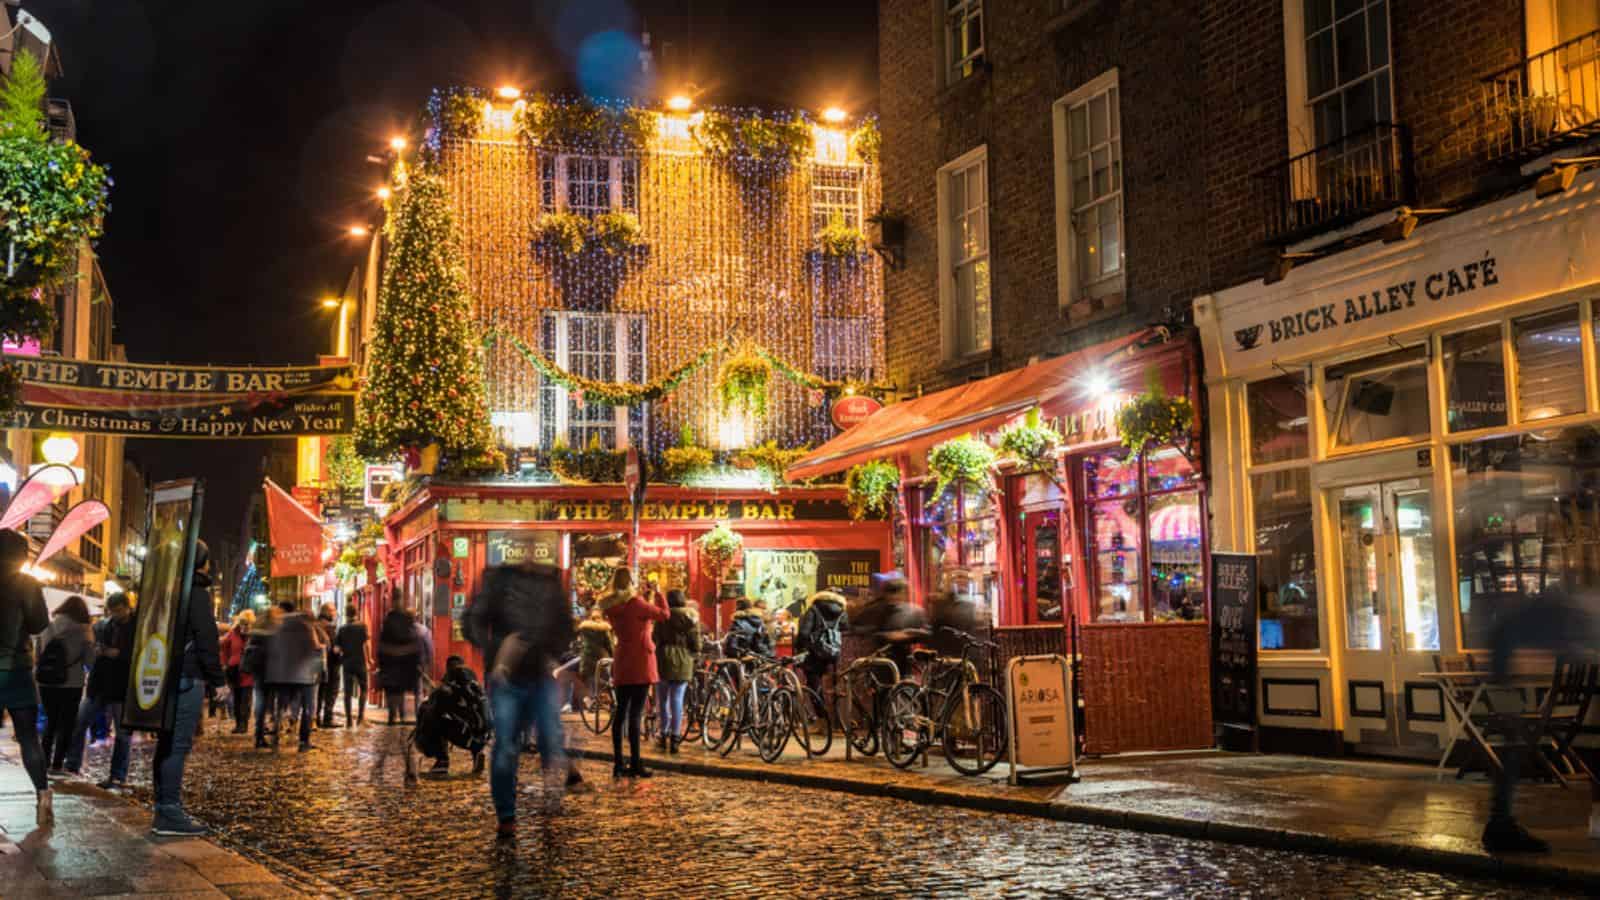 View of famous Temple Bar at night